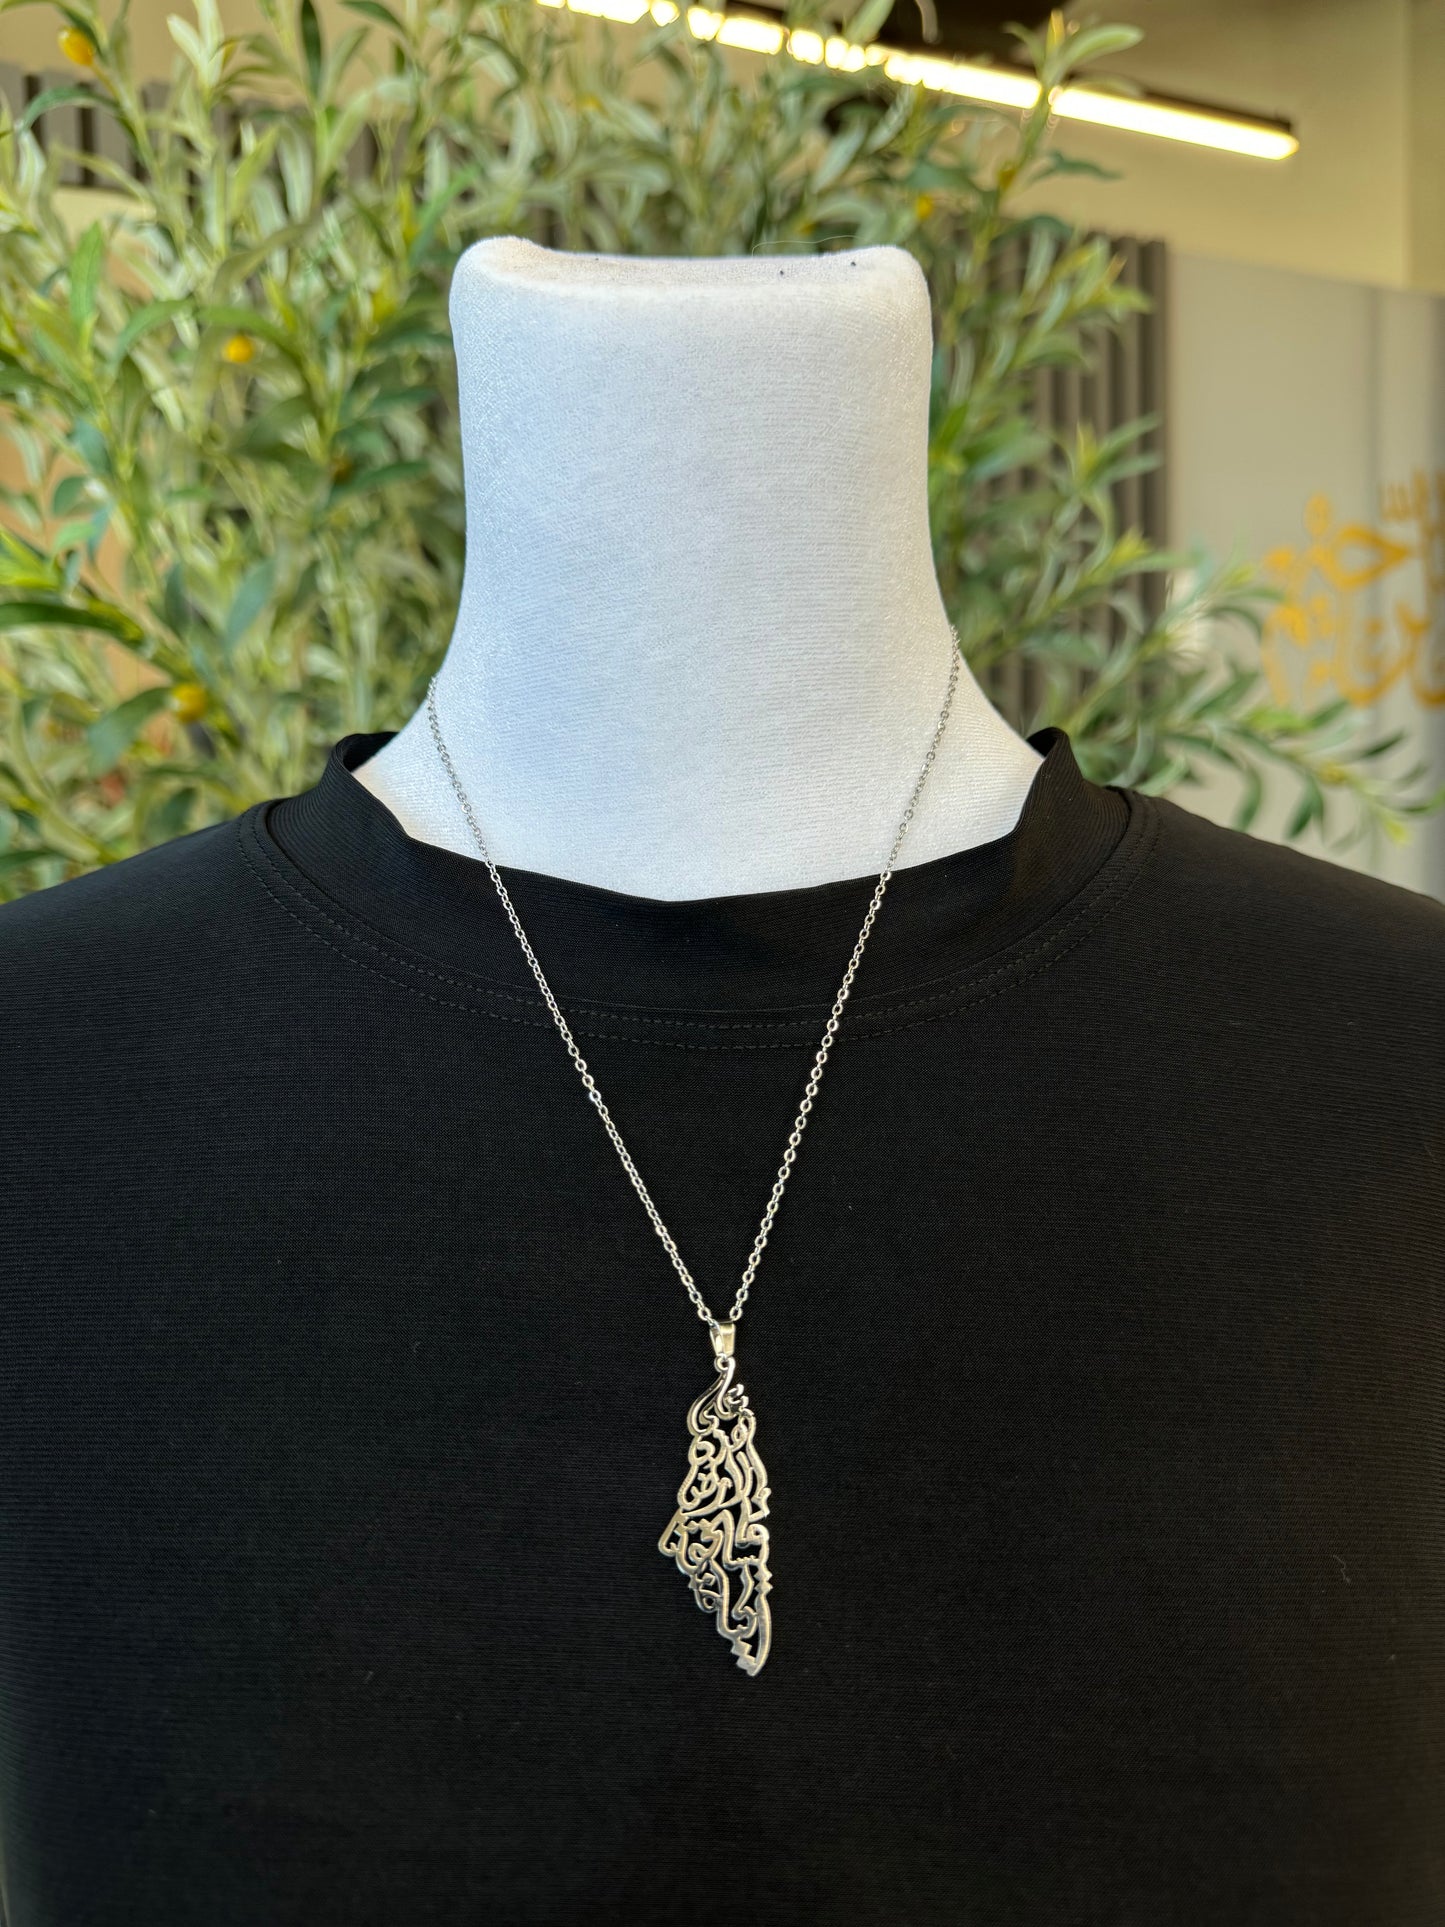 Pali Necklace - Silver Calligraphy